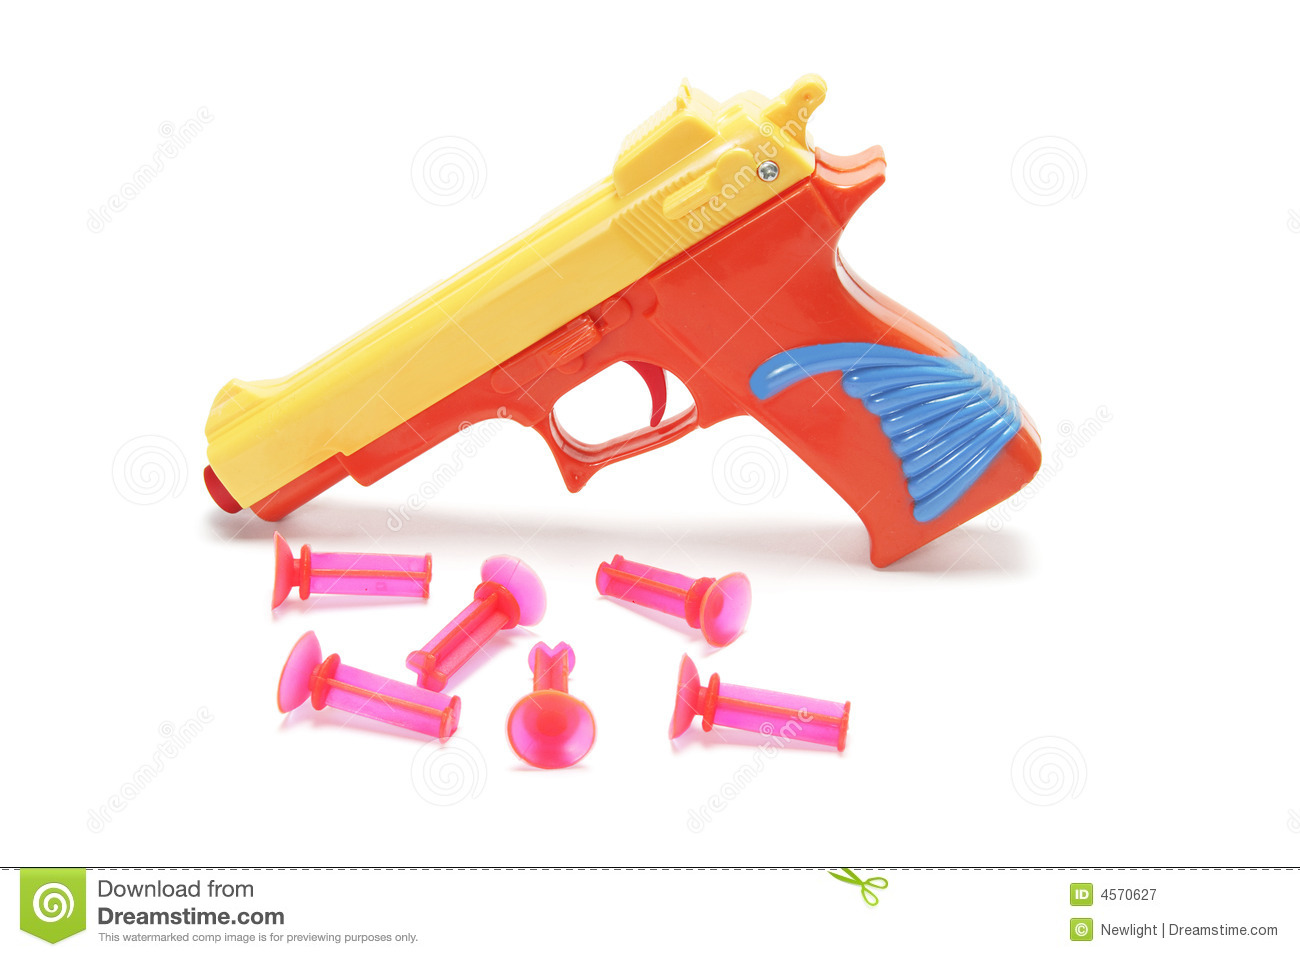 Toy Gun With Rubber Bullets Royalty Free Stock Photography   Image